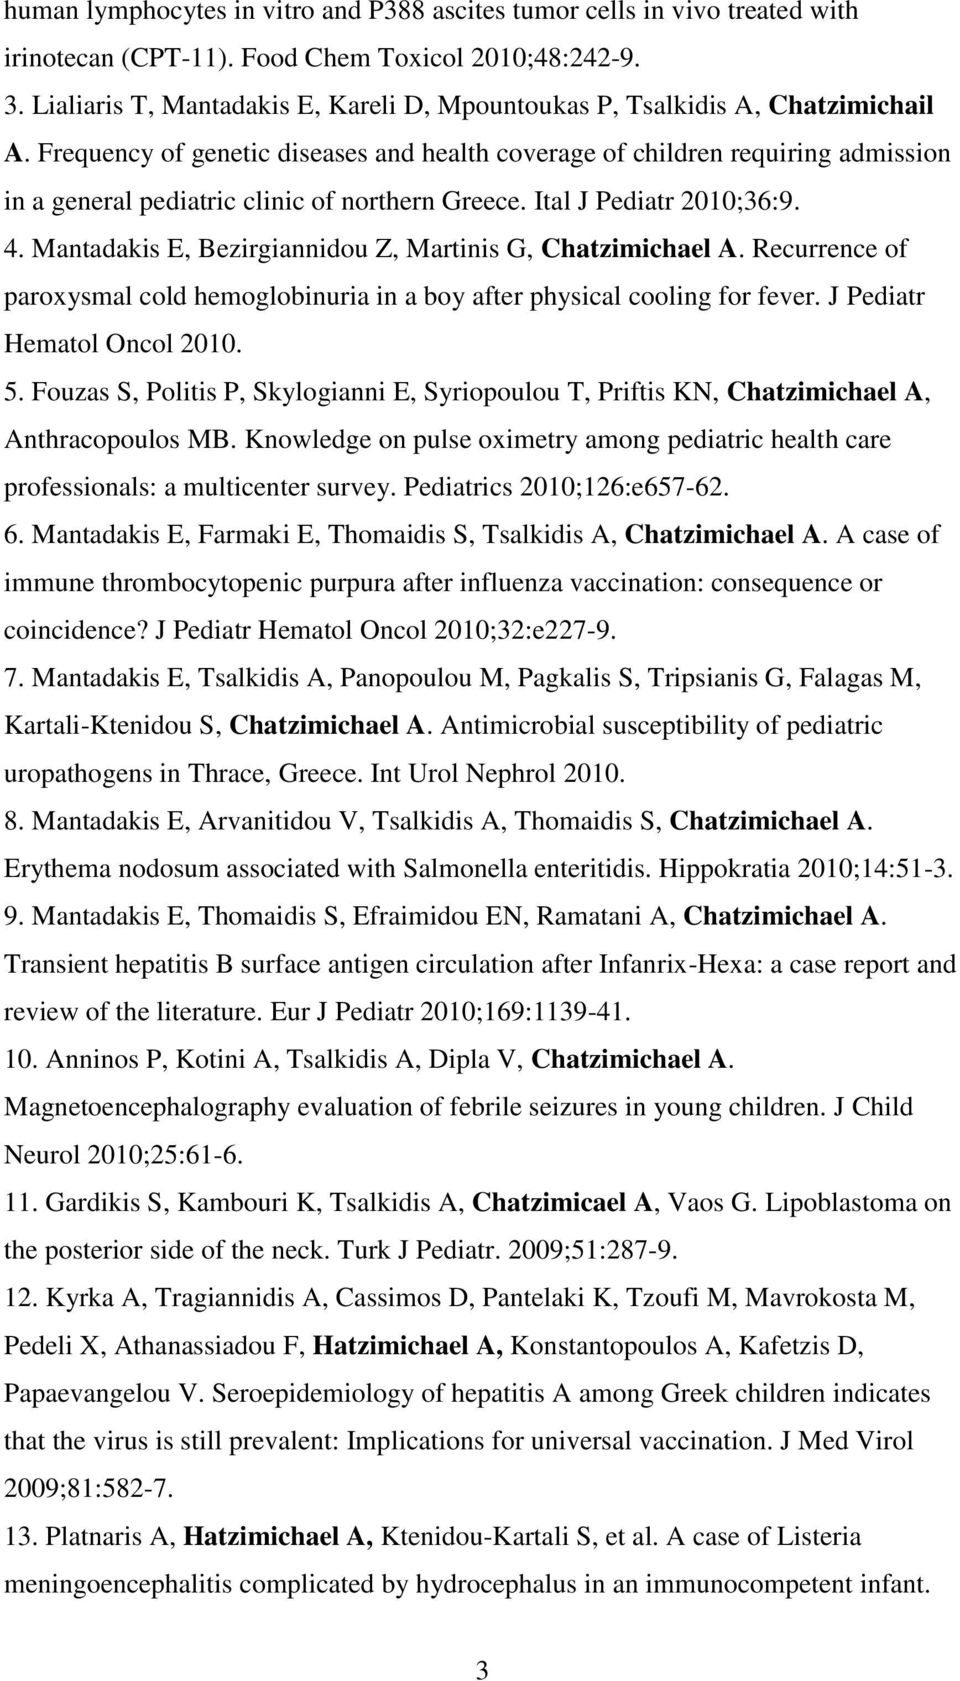 Frequency of genetic diseases and health coverage of children requiring admission in a general pediatric clinic of northern Greece. Ital J Pediatr 2010;36:9. 4.